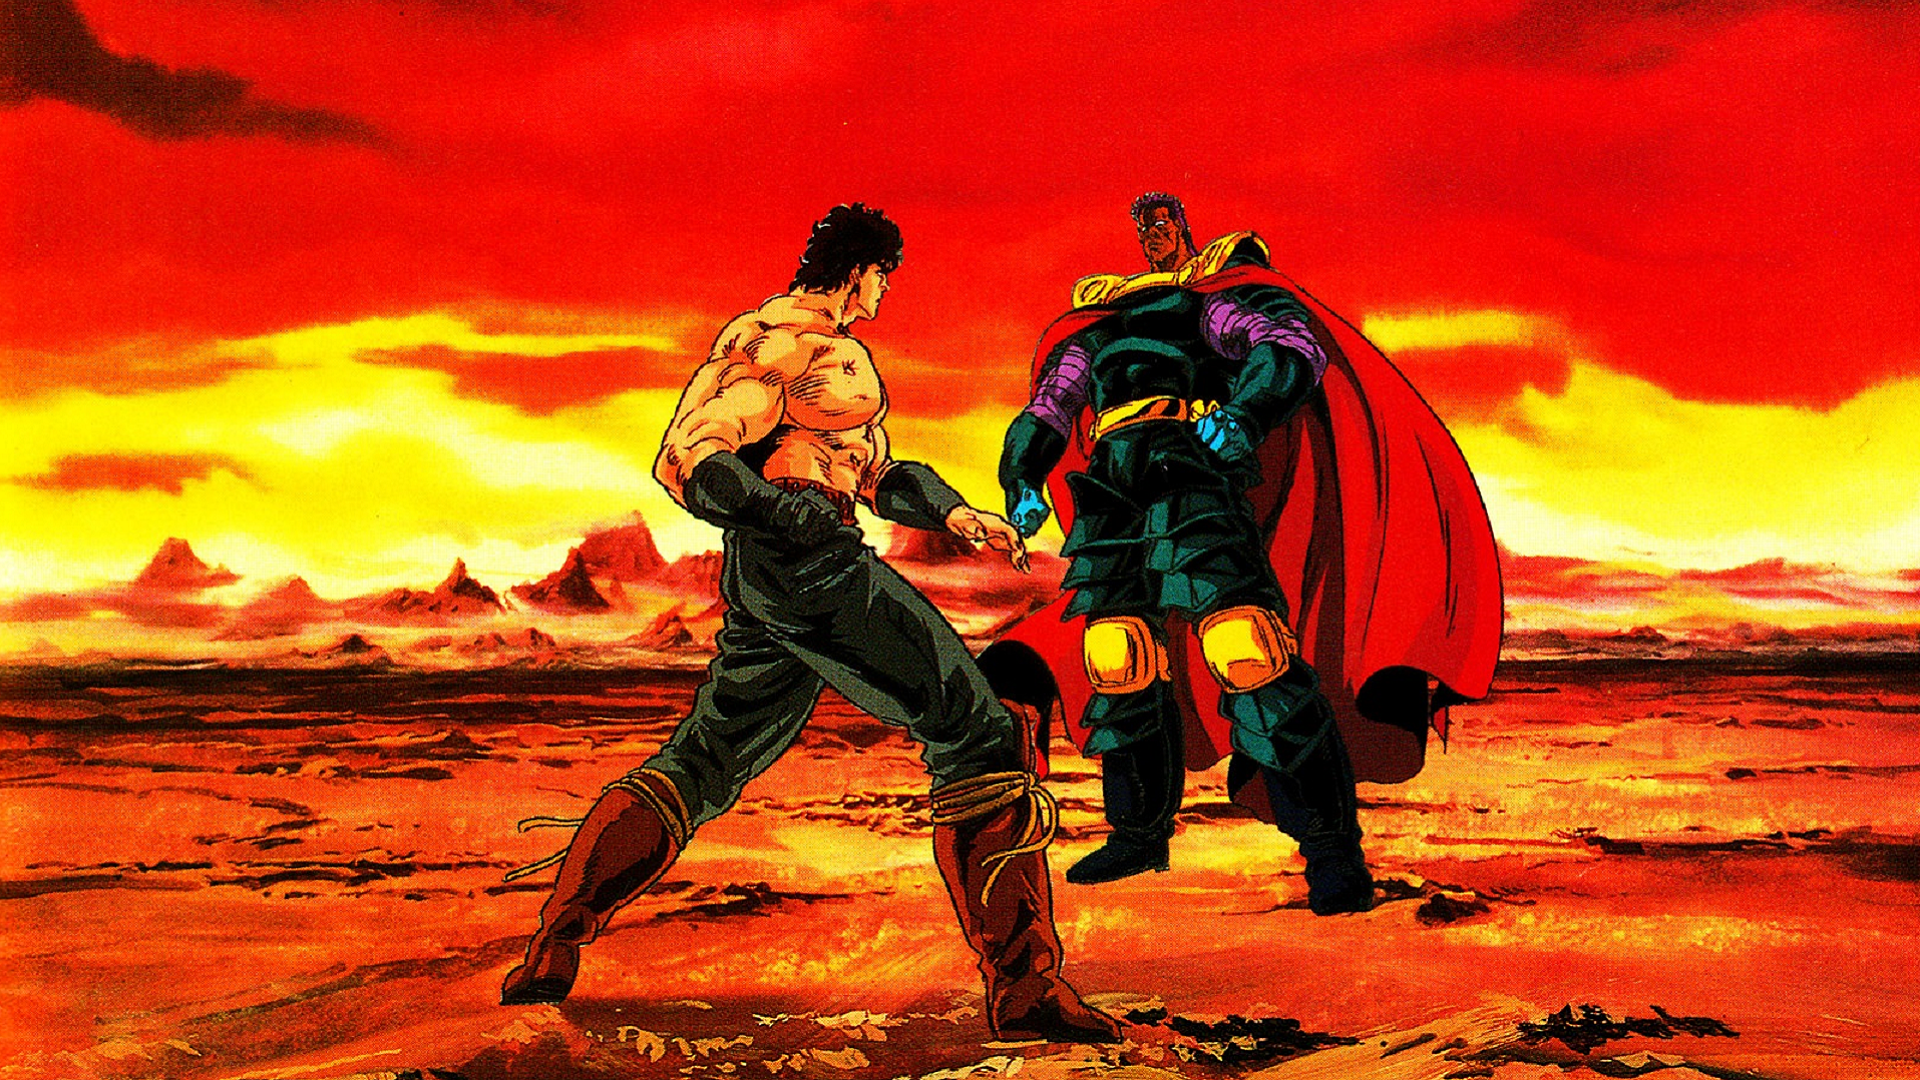 Fist of the North Star: 10 Big Brawls for the King of the Universe!